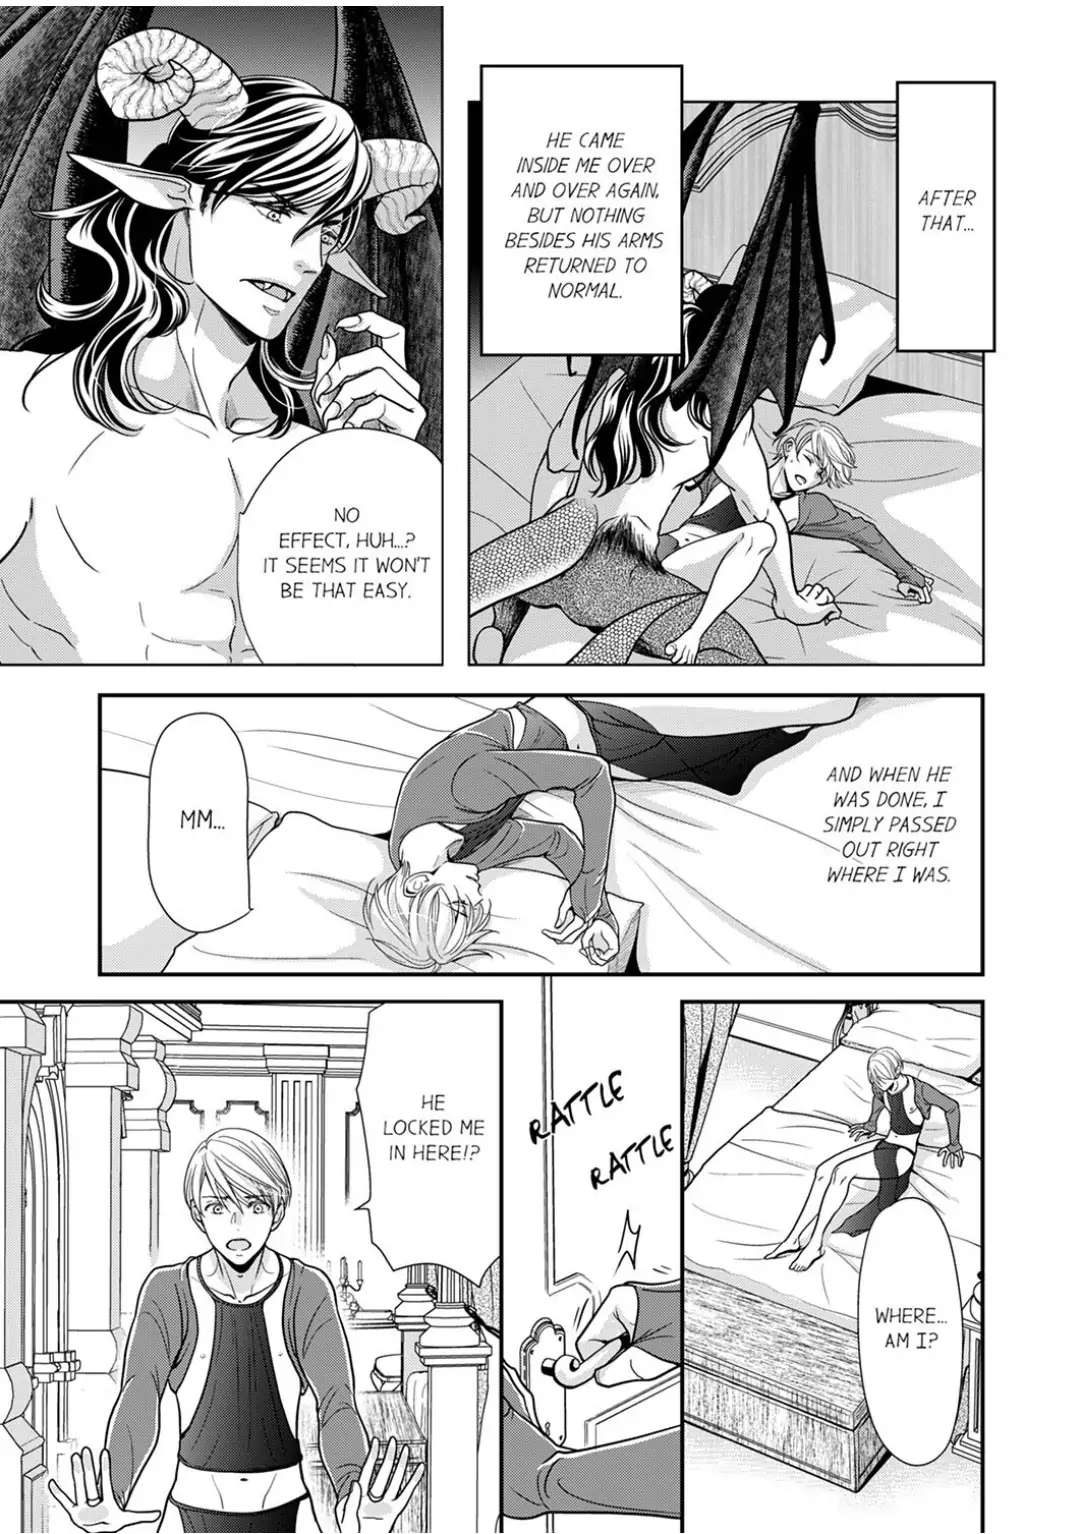 Maiden Summoning - To Break The Beast Prince's Curse, We Must Have Sex! - Page 3